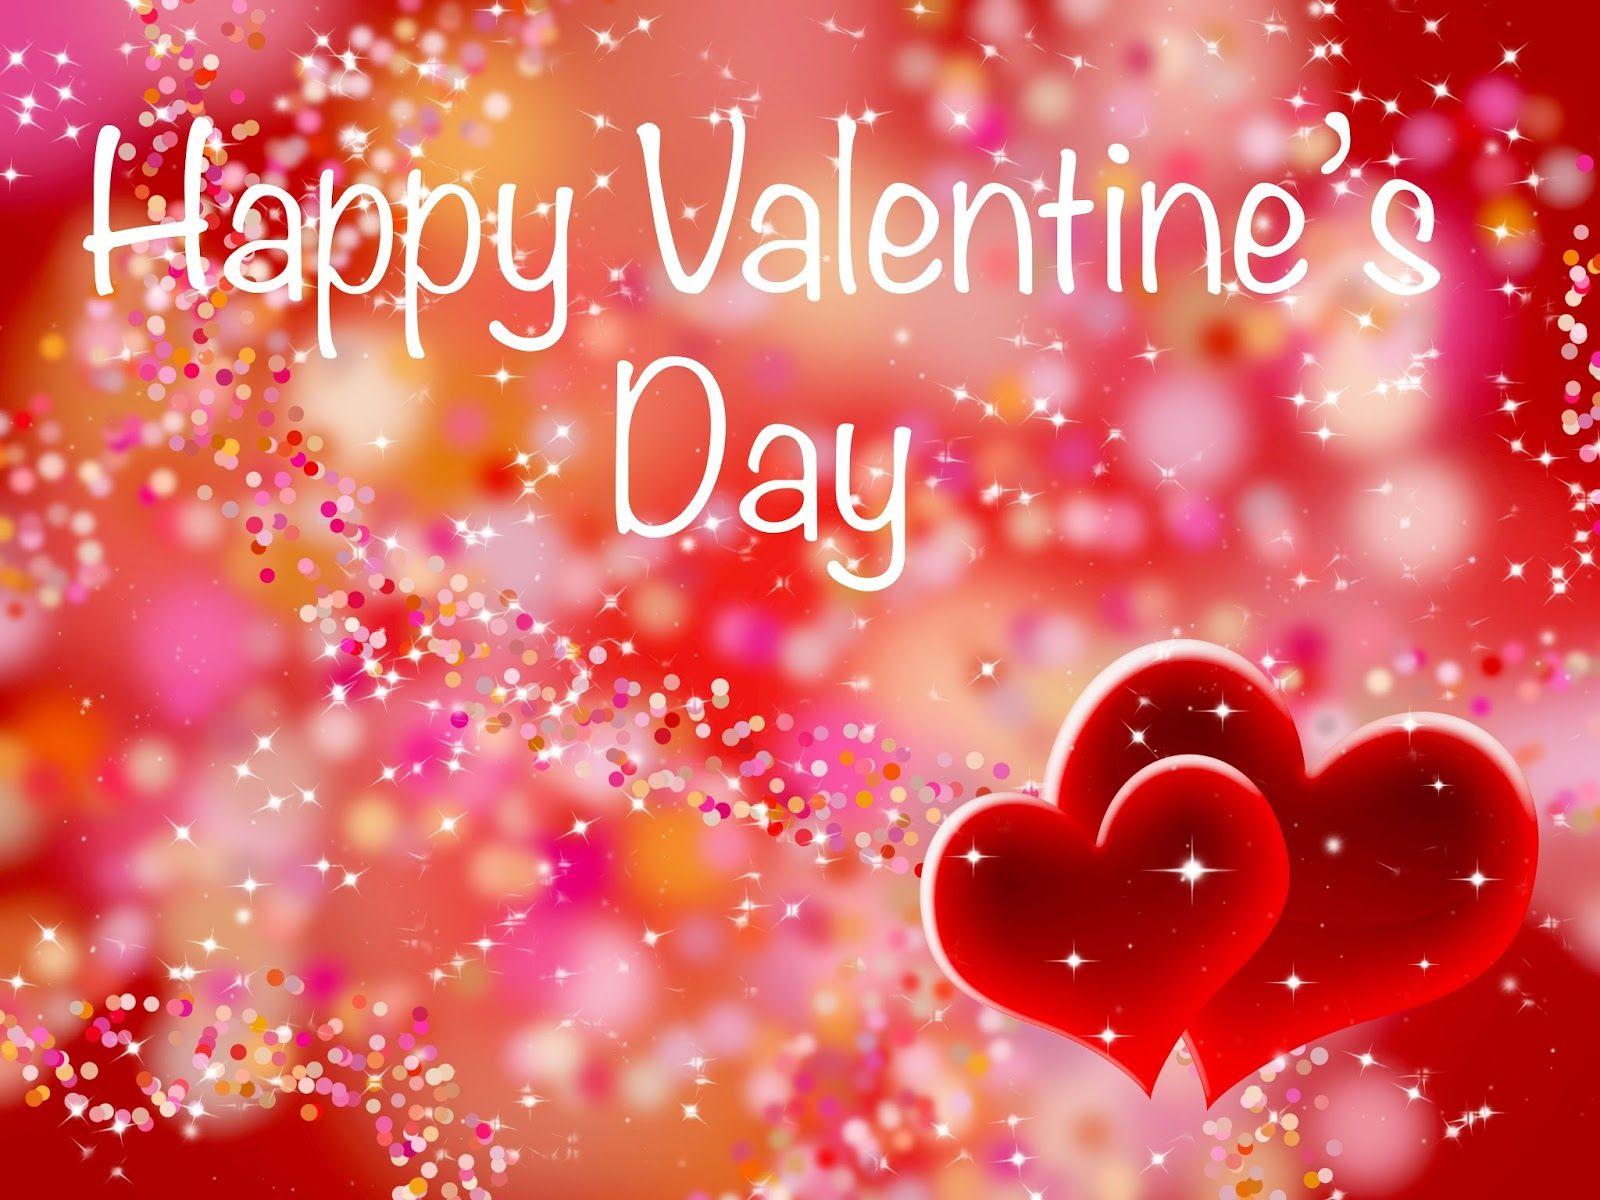 Happy Valentines Day 2018 Image, Wallpaper, Picture, Photo